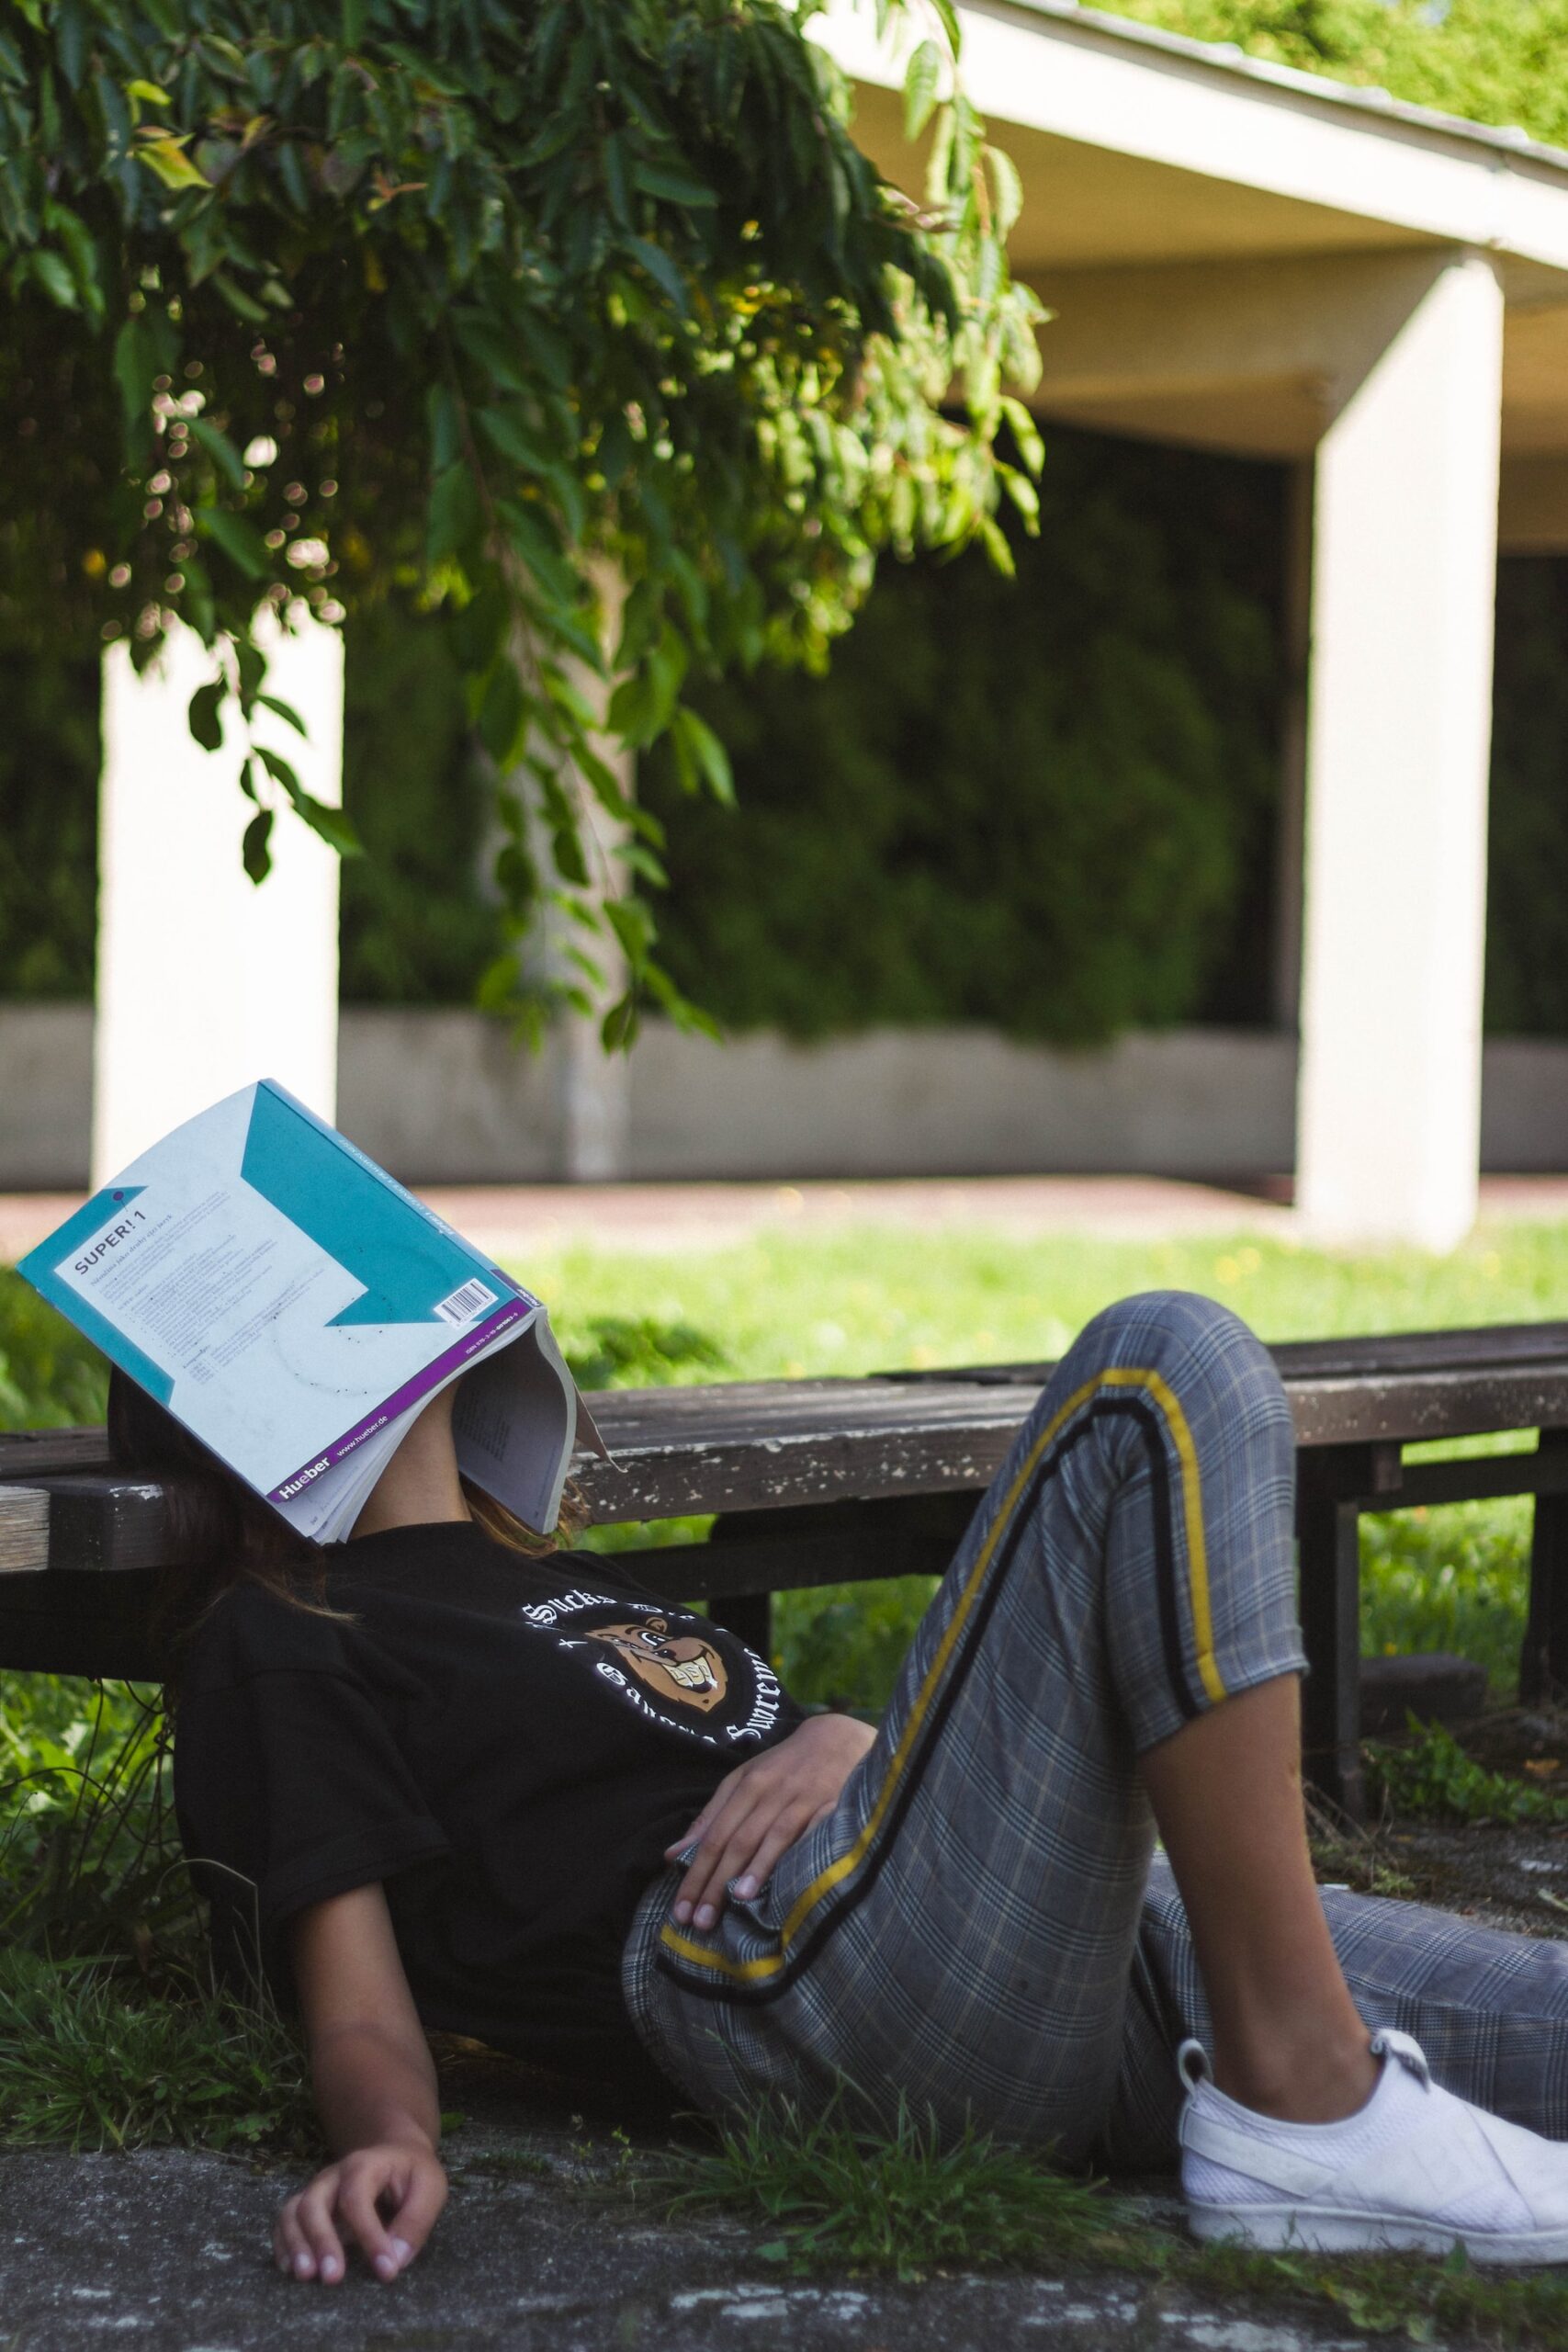 A student sitting on the ground with a textbook on their face, dozing off.